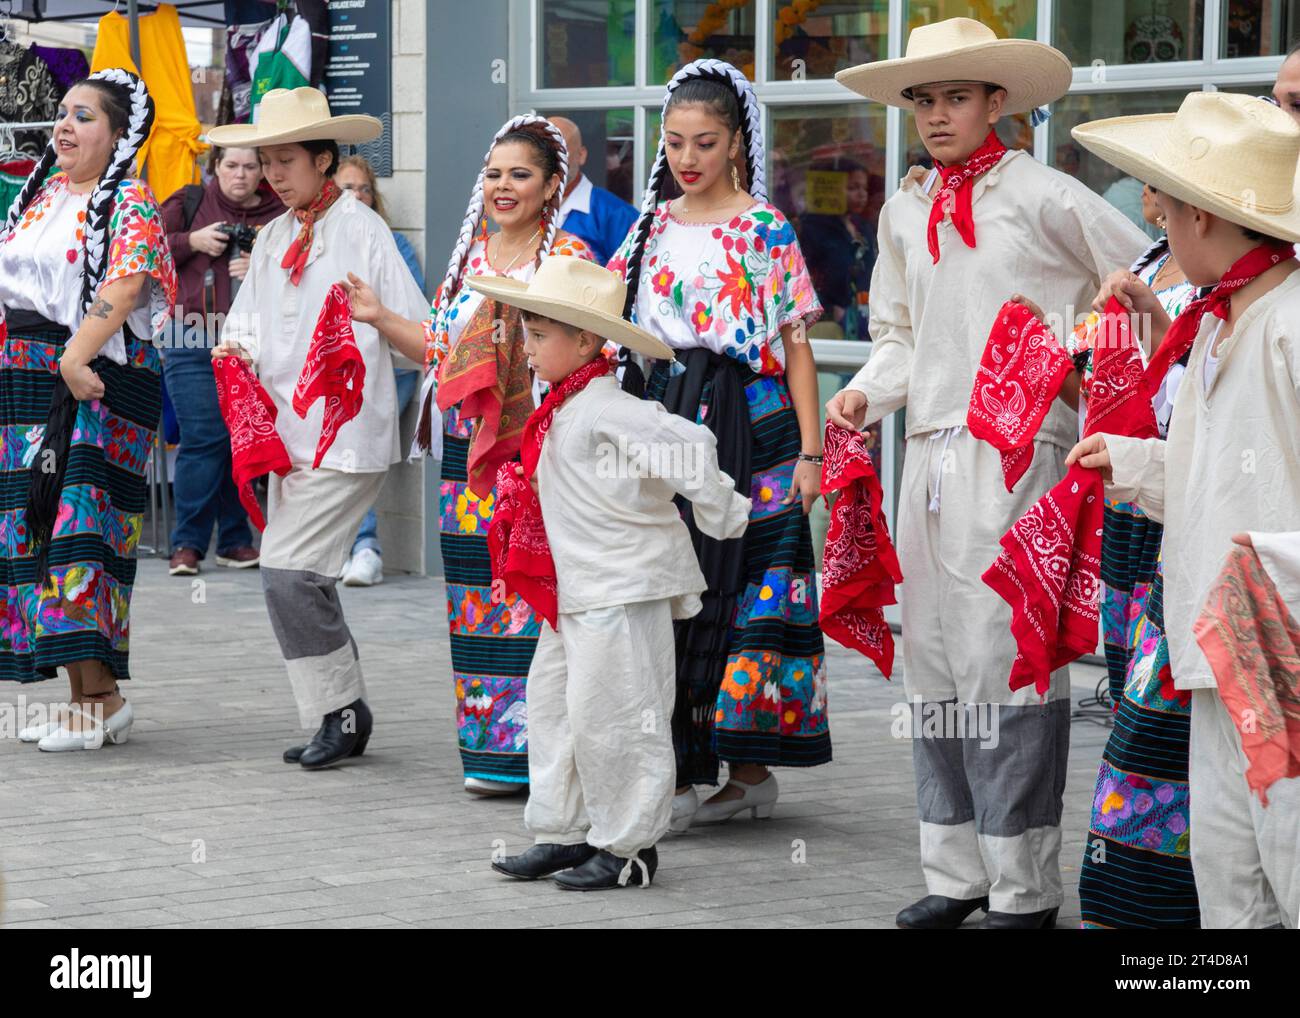 Detroit, Michigan - The Ballet Folklorico Moyocoyani Izel performs during the Day of the Dead celebration at Valade Park on the Detroit Riverfront. Stock Photo